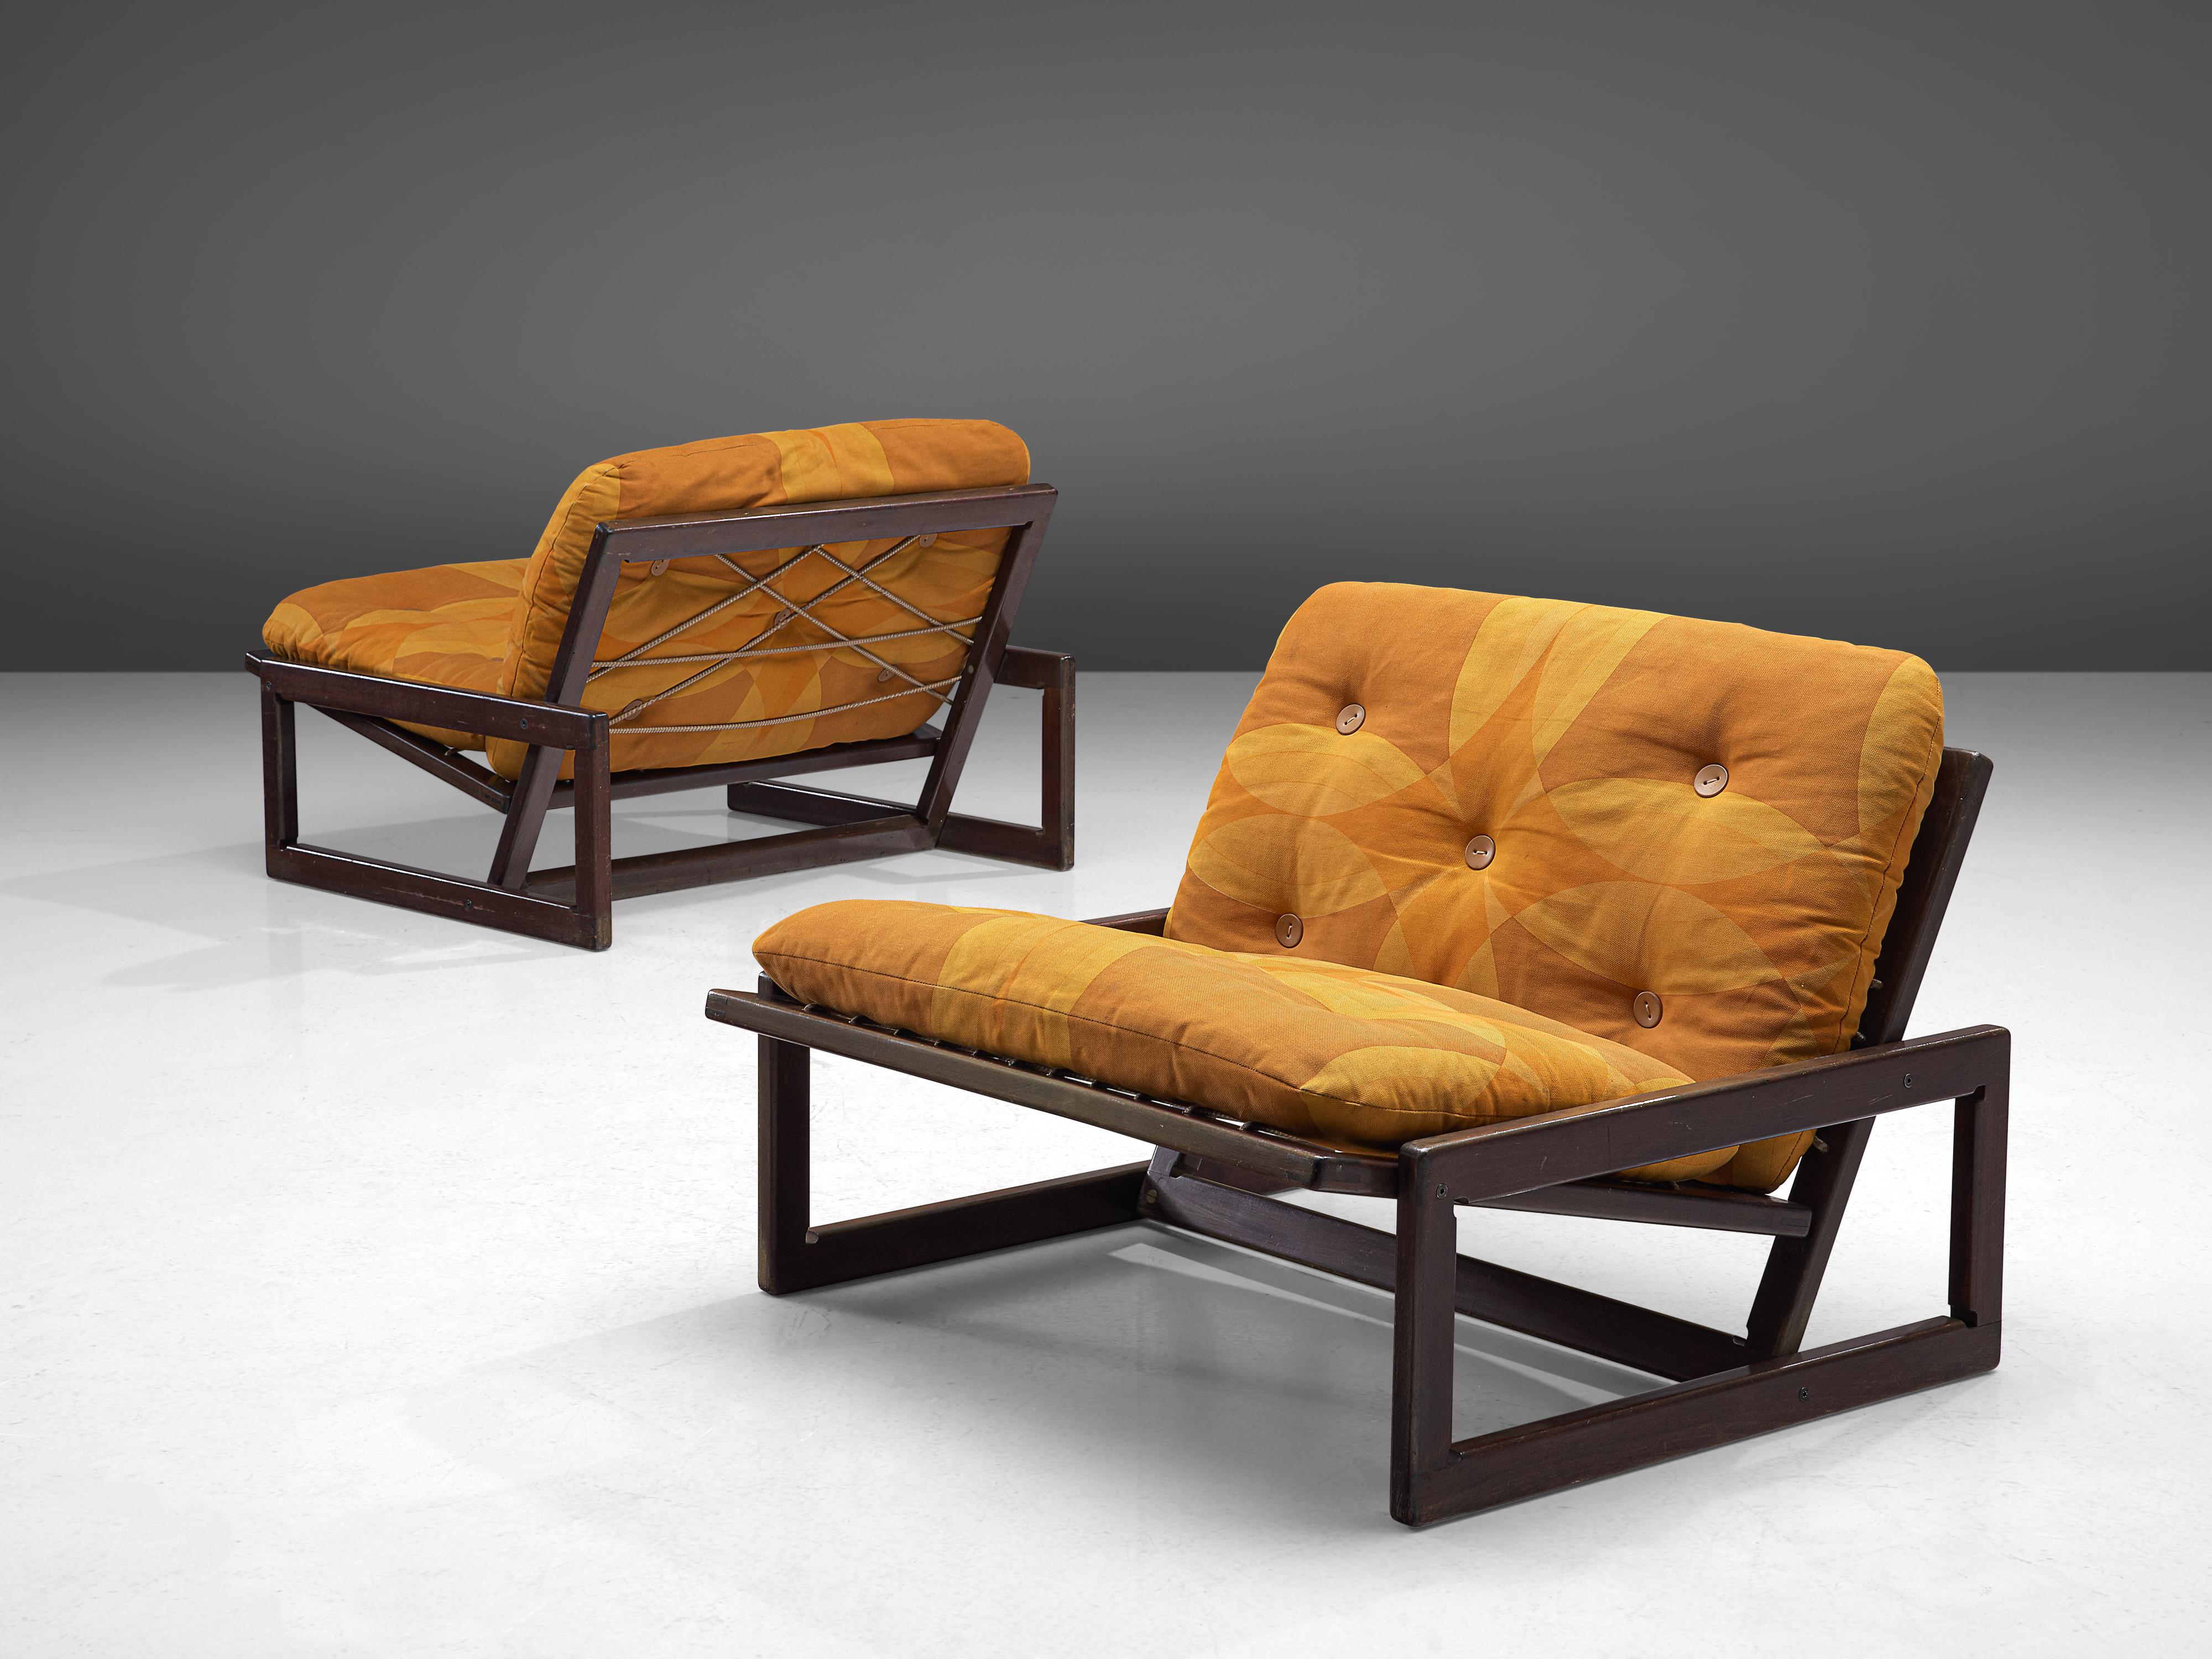 Afra & Tobia Scarpa for Cassina, set of 'Carlotta' easy chairs, lacquered wood and rope, Italy, 1967

Pair of 'Carlotta' easy chairs designed by Afra and Tobia Scarpa for Cassina. The chairs feature a geometric, cubic frame, build up from four